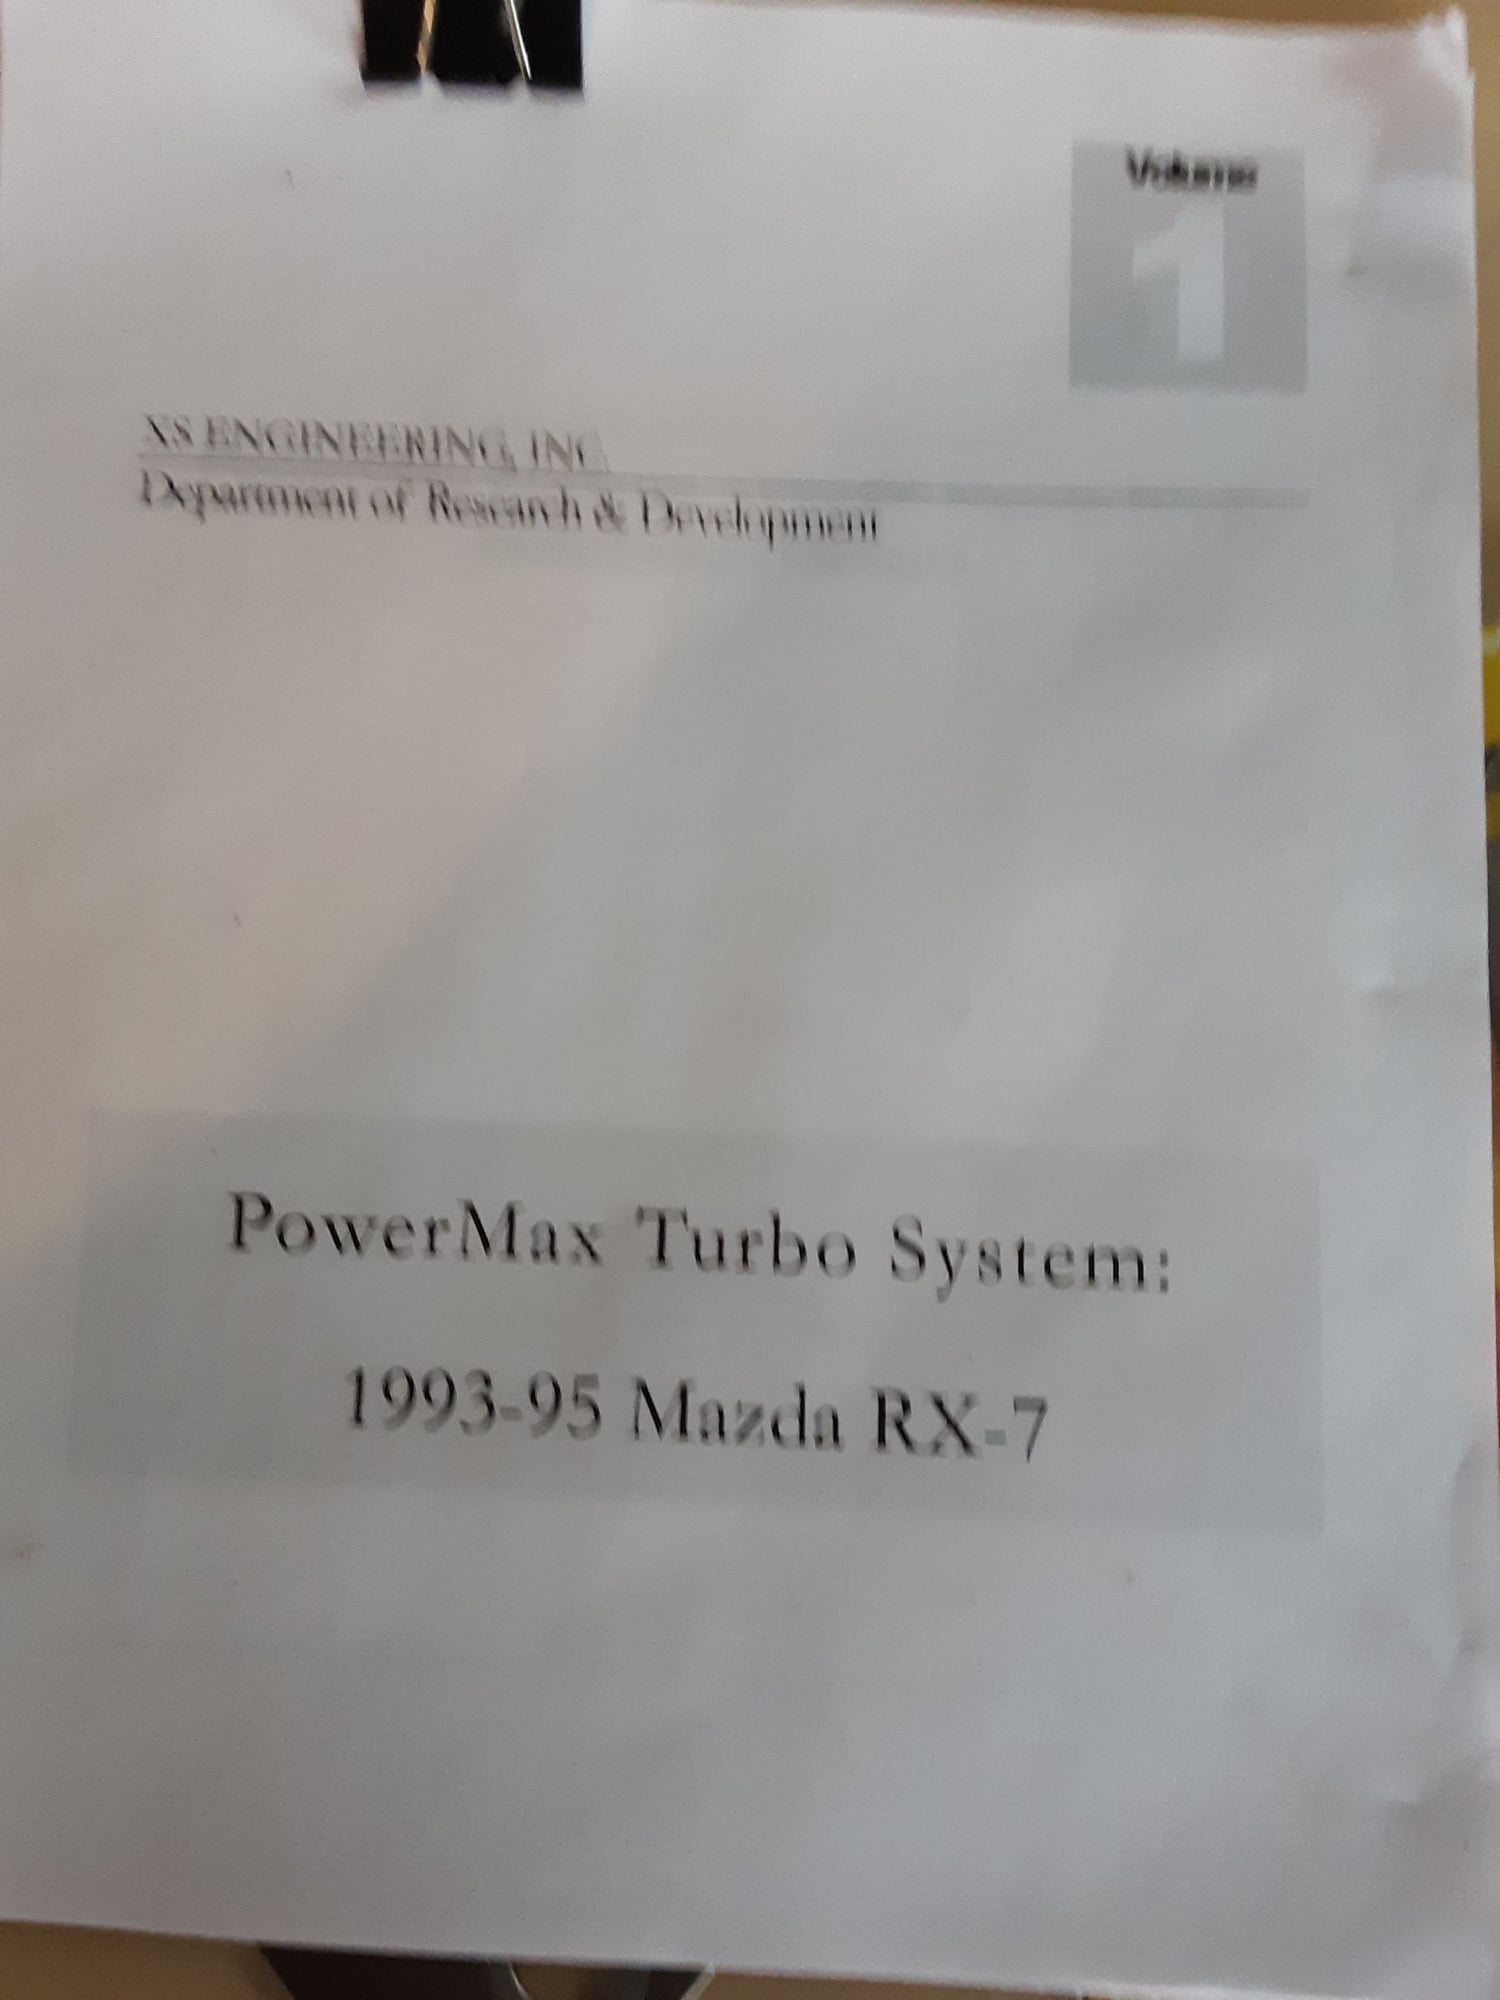 Engine - Power Adders - Power Max Turbo system - Used - 1993 to 1995 Mazda RX-7 - Apollo Beach, FL 33572, United States